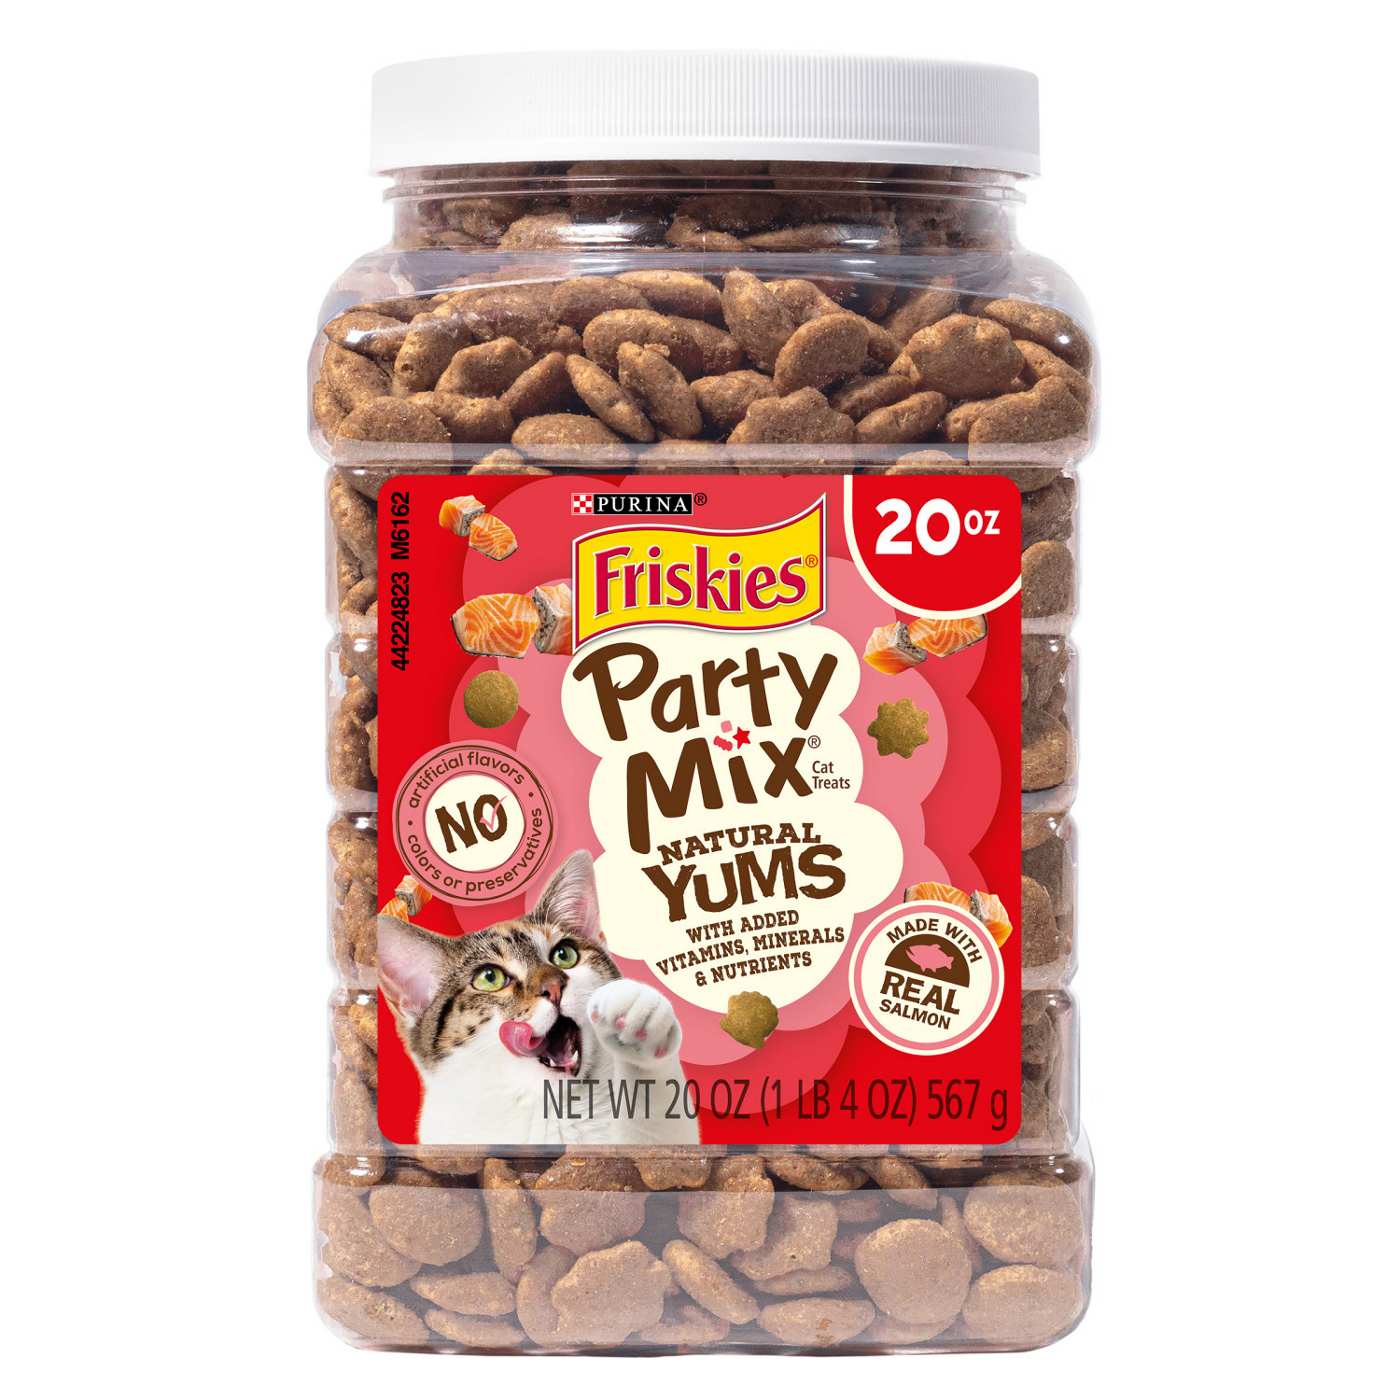 Friskies Purina Friskies Natural Cat Treats Party Mix Natural Yums With Real Salmon and Added Vitamins, Minerals and Nutrients; image 1 of 2